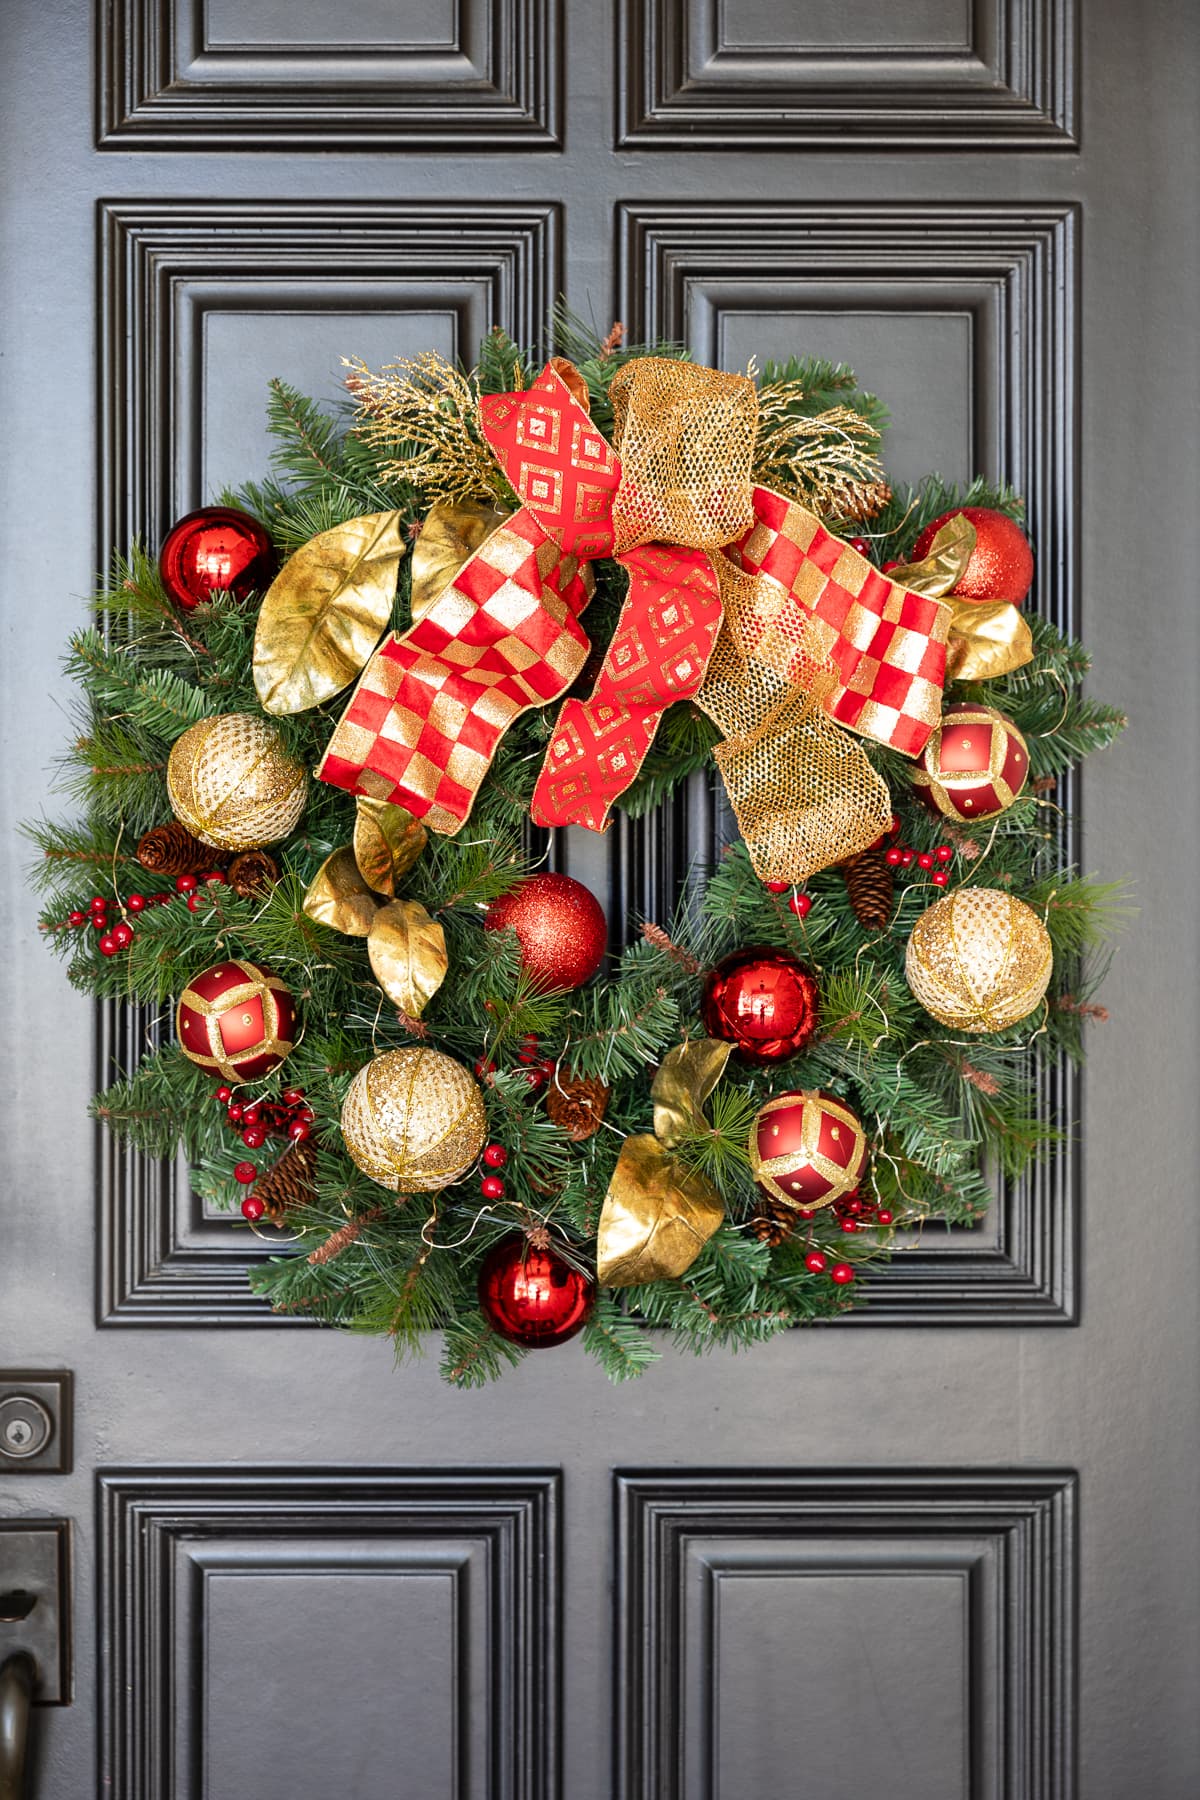 Christmas wreath decorated with red and gold ribbons, ornaments, and leaves hanging on front door.